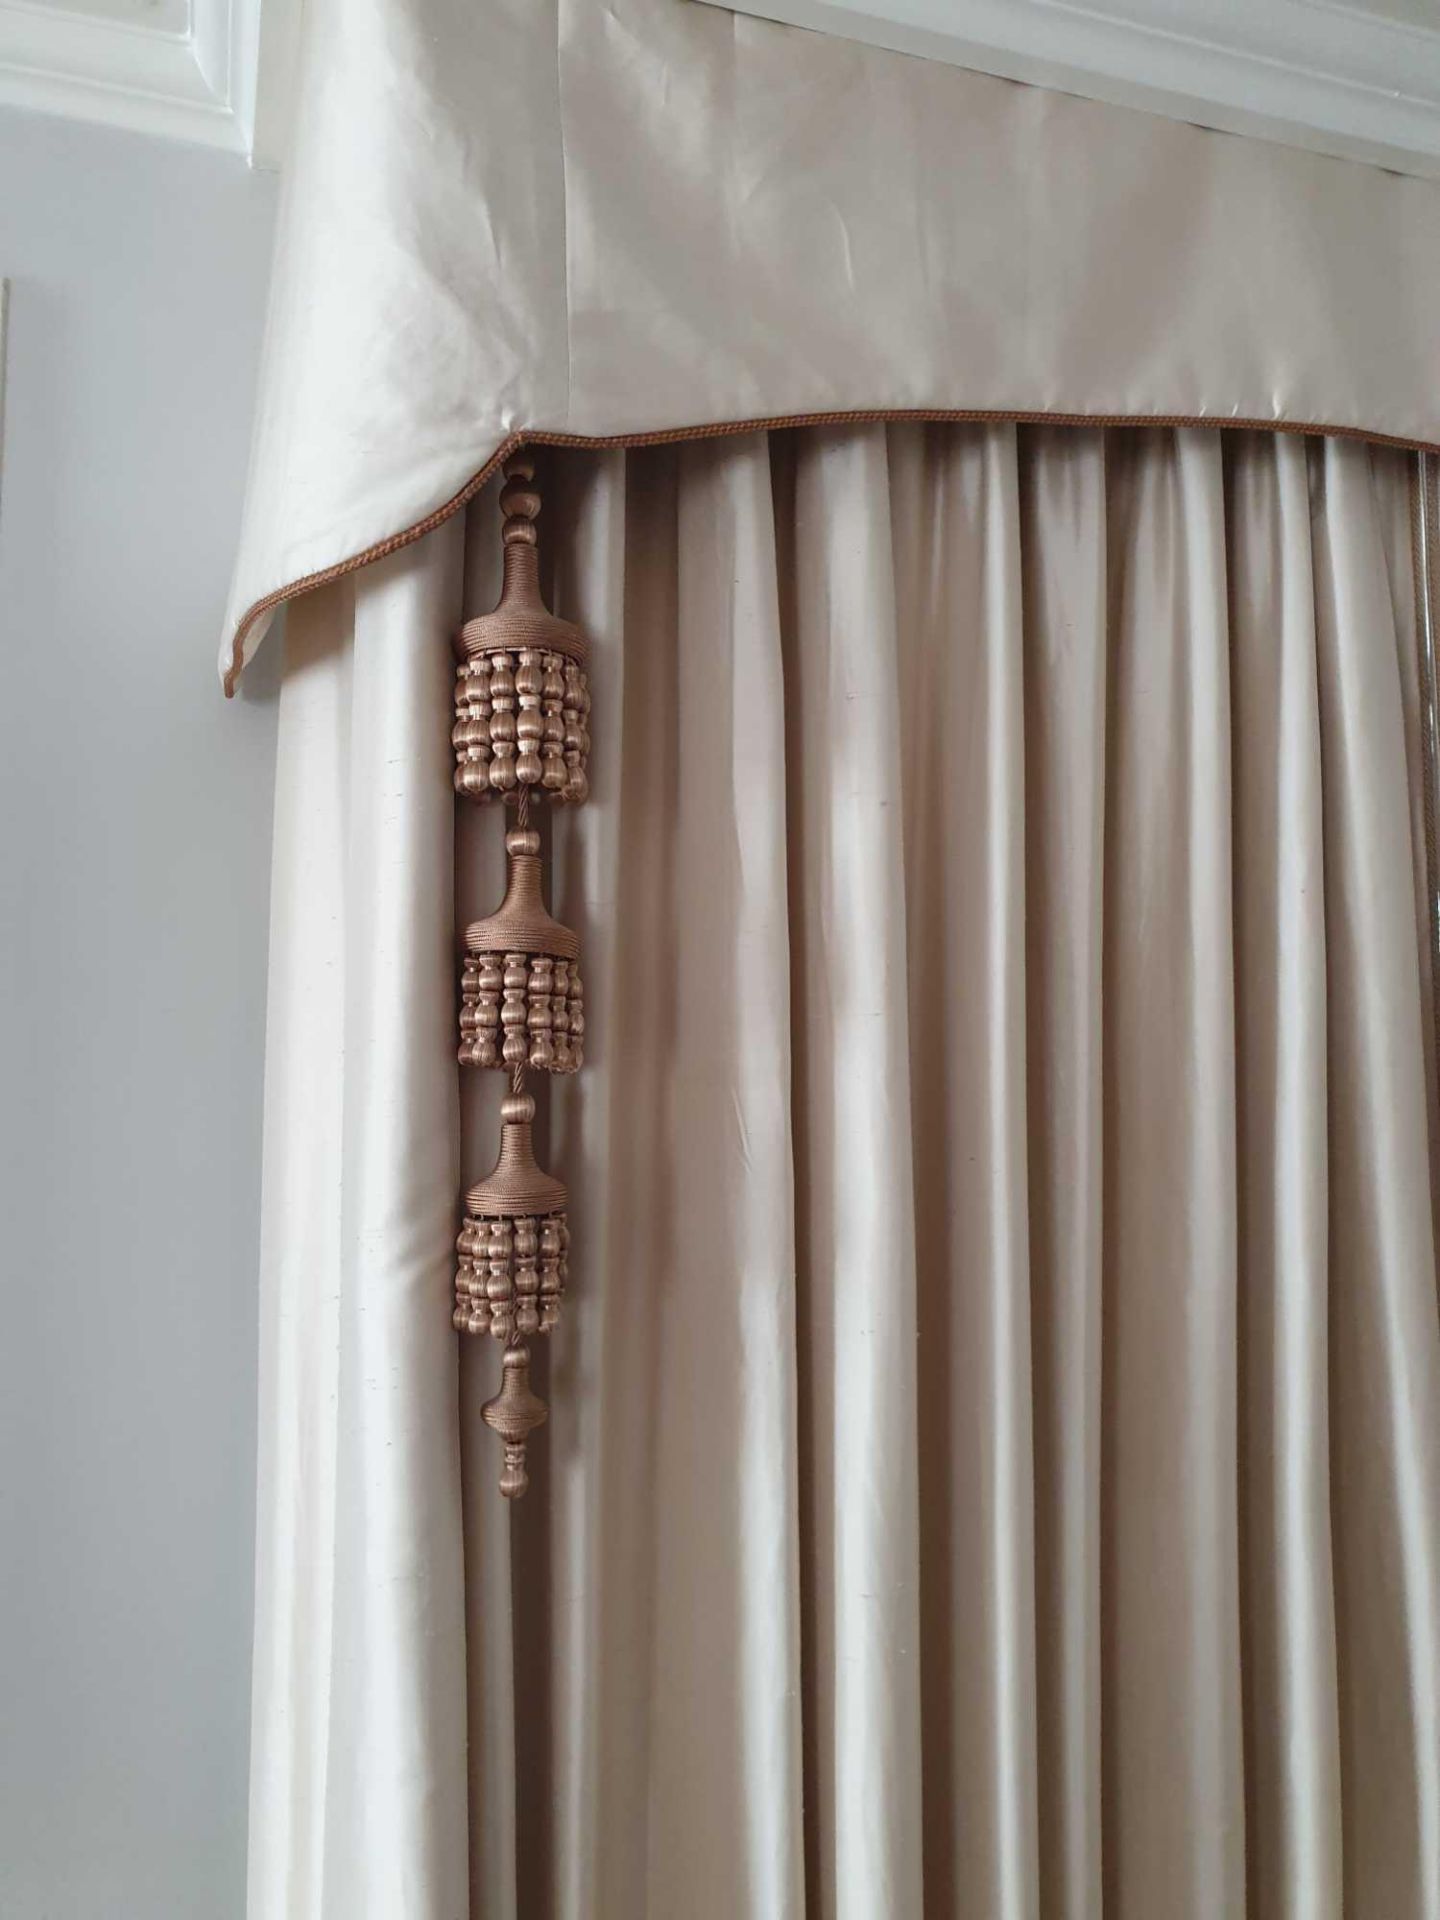 A Pair Of Silk Fully Lined Drapes With Pelmet Solid Cream-Gold Colour With Copper Piping On Pelmet - Bild 2 aus 2